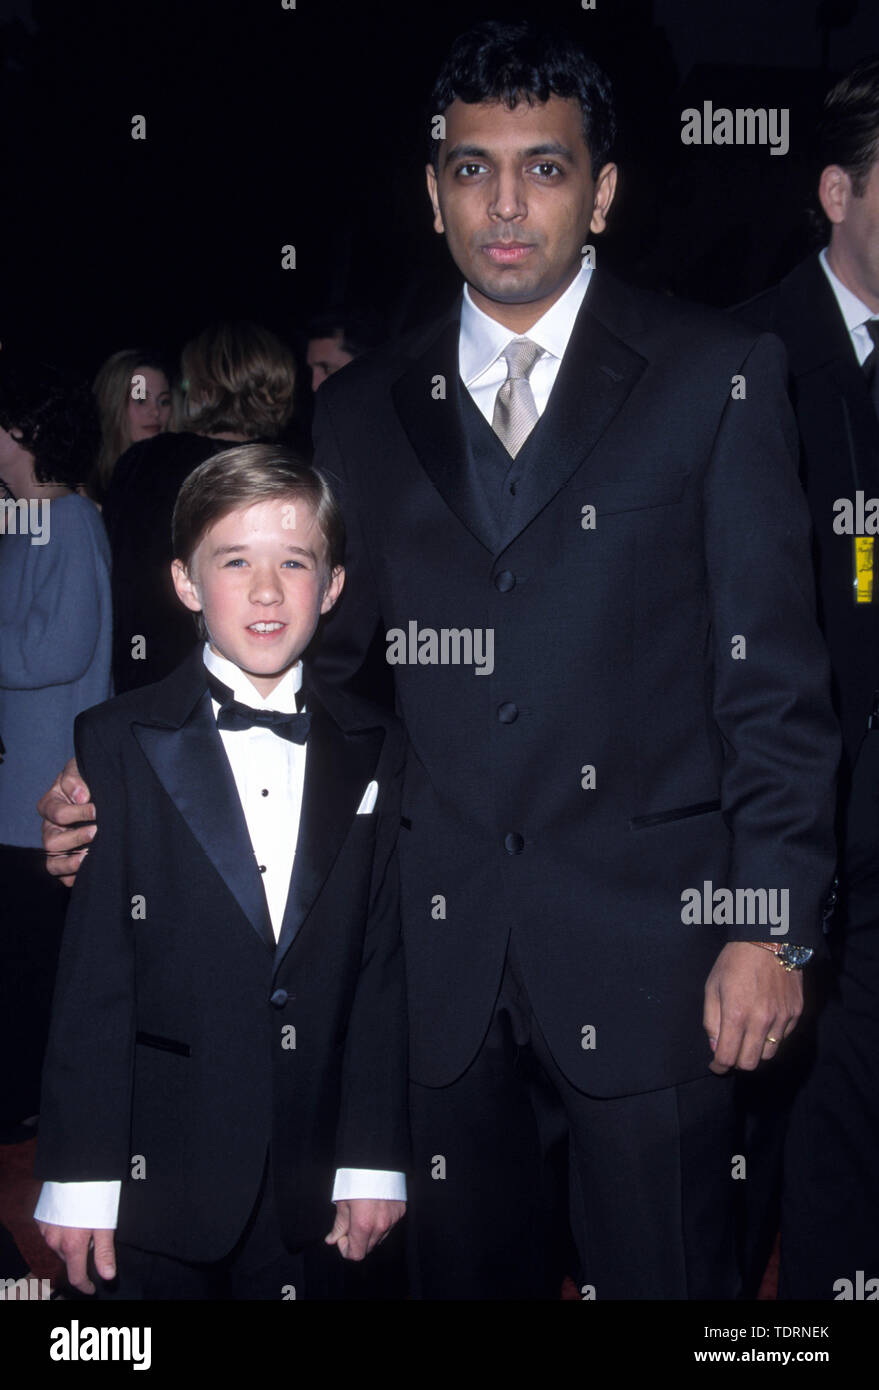 Jan 09, 2000; Los Angeles, CA, USA; Phenomenal young actor HALEY JOEL OSMENT with the director of 'The Sixth Sense' M. NIGHT SHYAMALAN at the 2000 People's Choice Awards. (Credit Image: © Chris Delmas/ZUMA Wire) Stock Photo